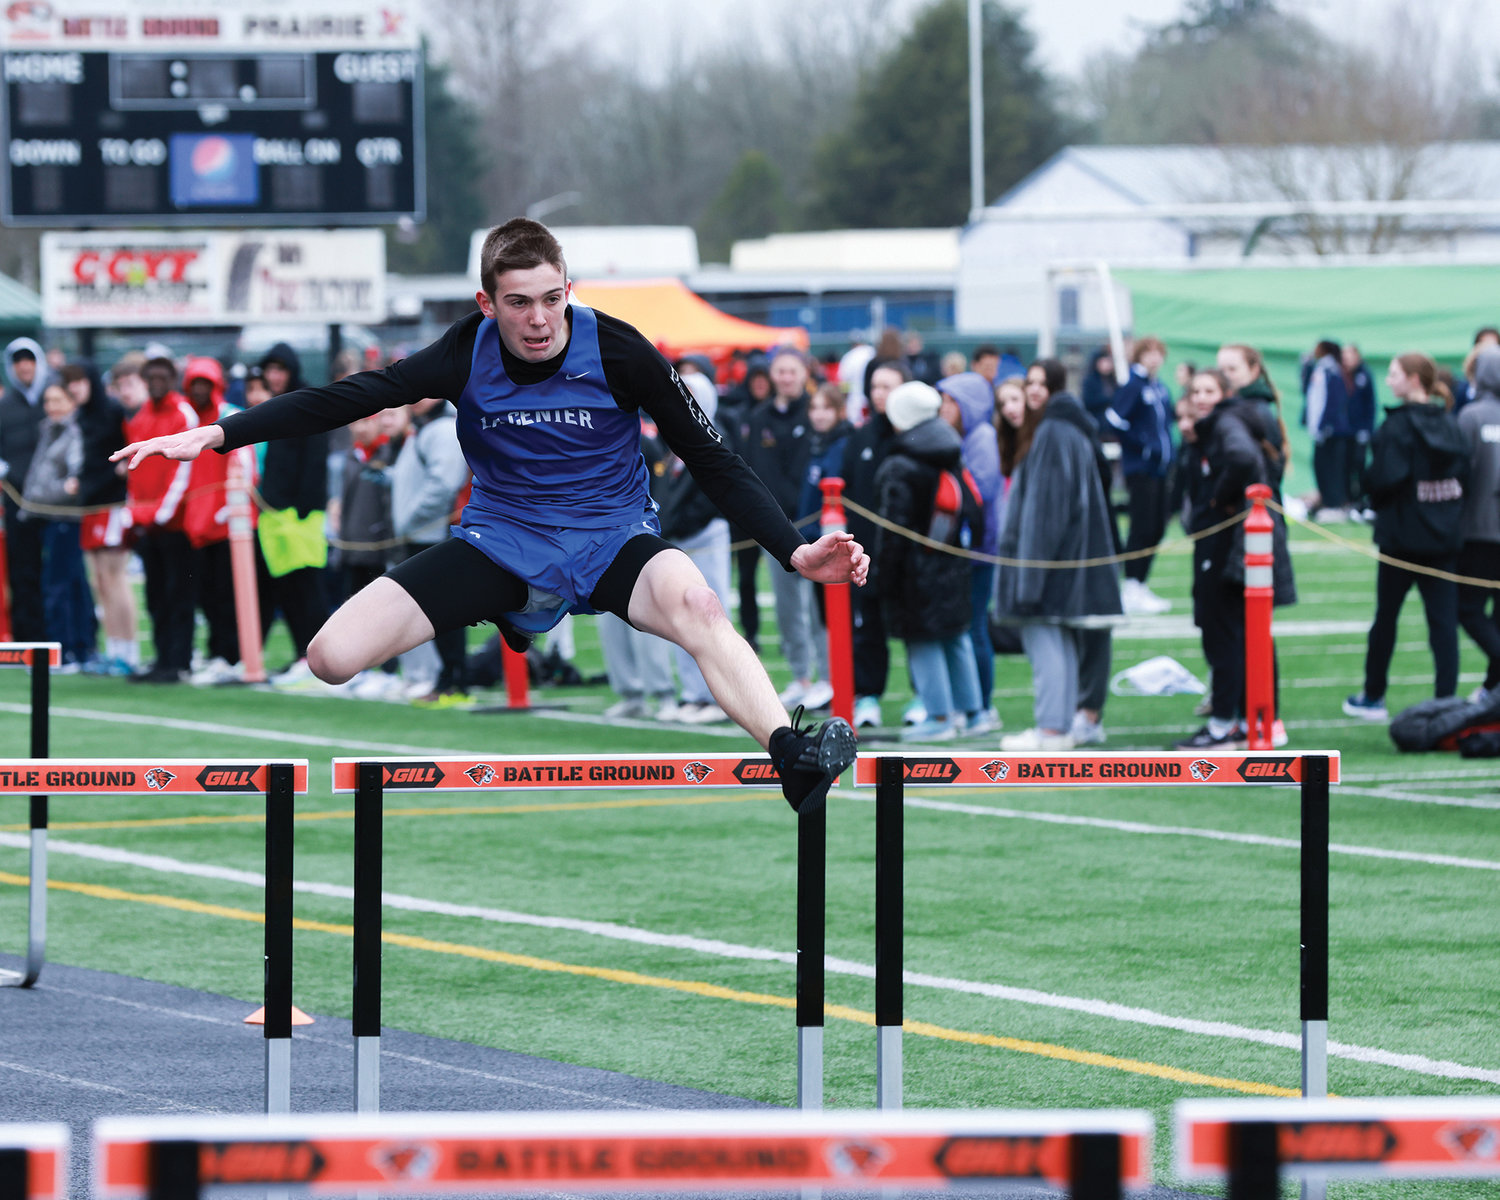 Ethan Wilson, a freshman for La Center, clears a 39-inch hurdle during heat three of the 110-meter hurdles at the Tiger Invite at Battle Ground High School on Saturday, March 25.